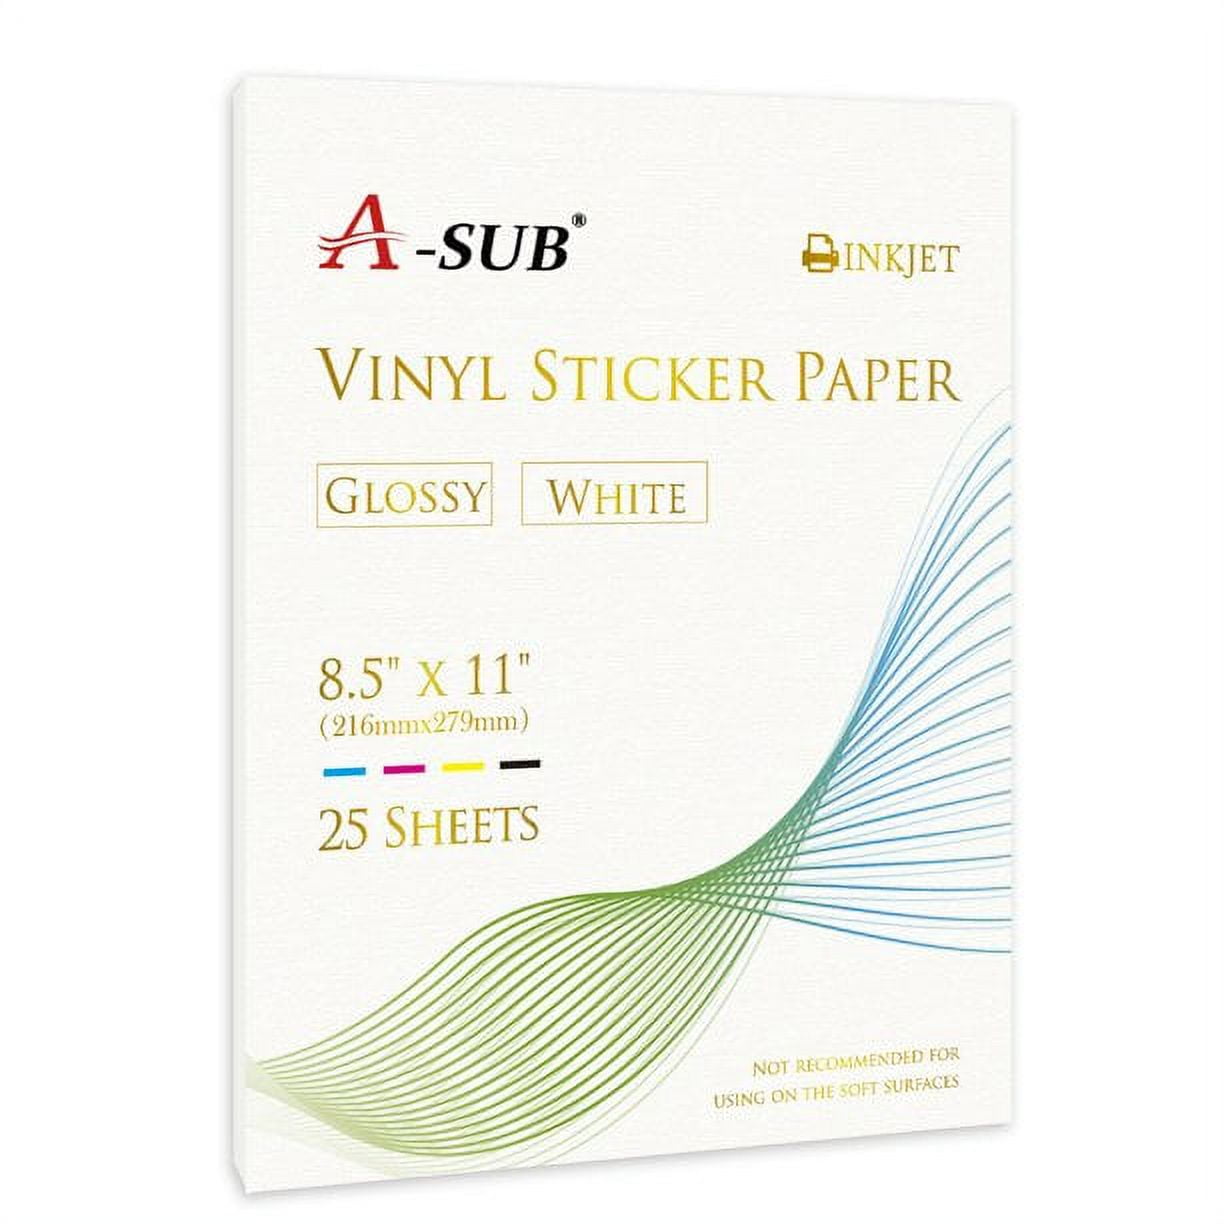 A-SUB Vinyl Sticker Paper Glossy White for Inkjet Printer 25 Sheets  Removable Printable Waterproof Sticker Paper 8.5x11 Inch for DIY Decal,  Stickers